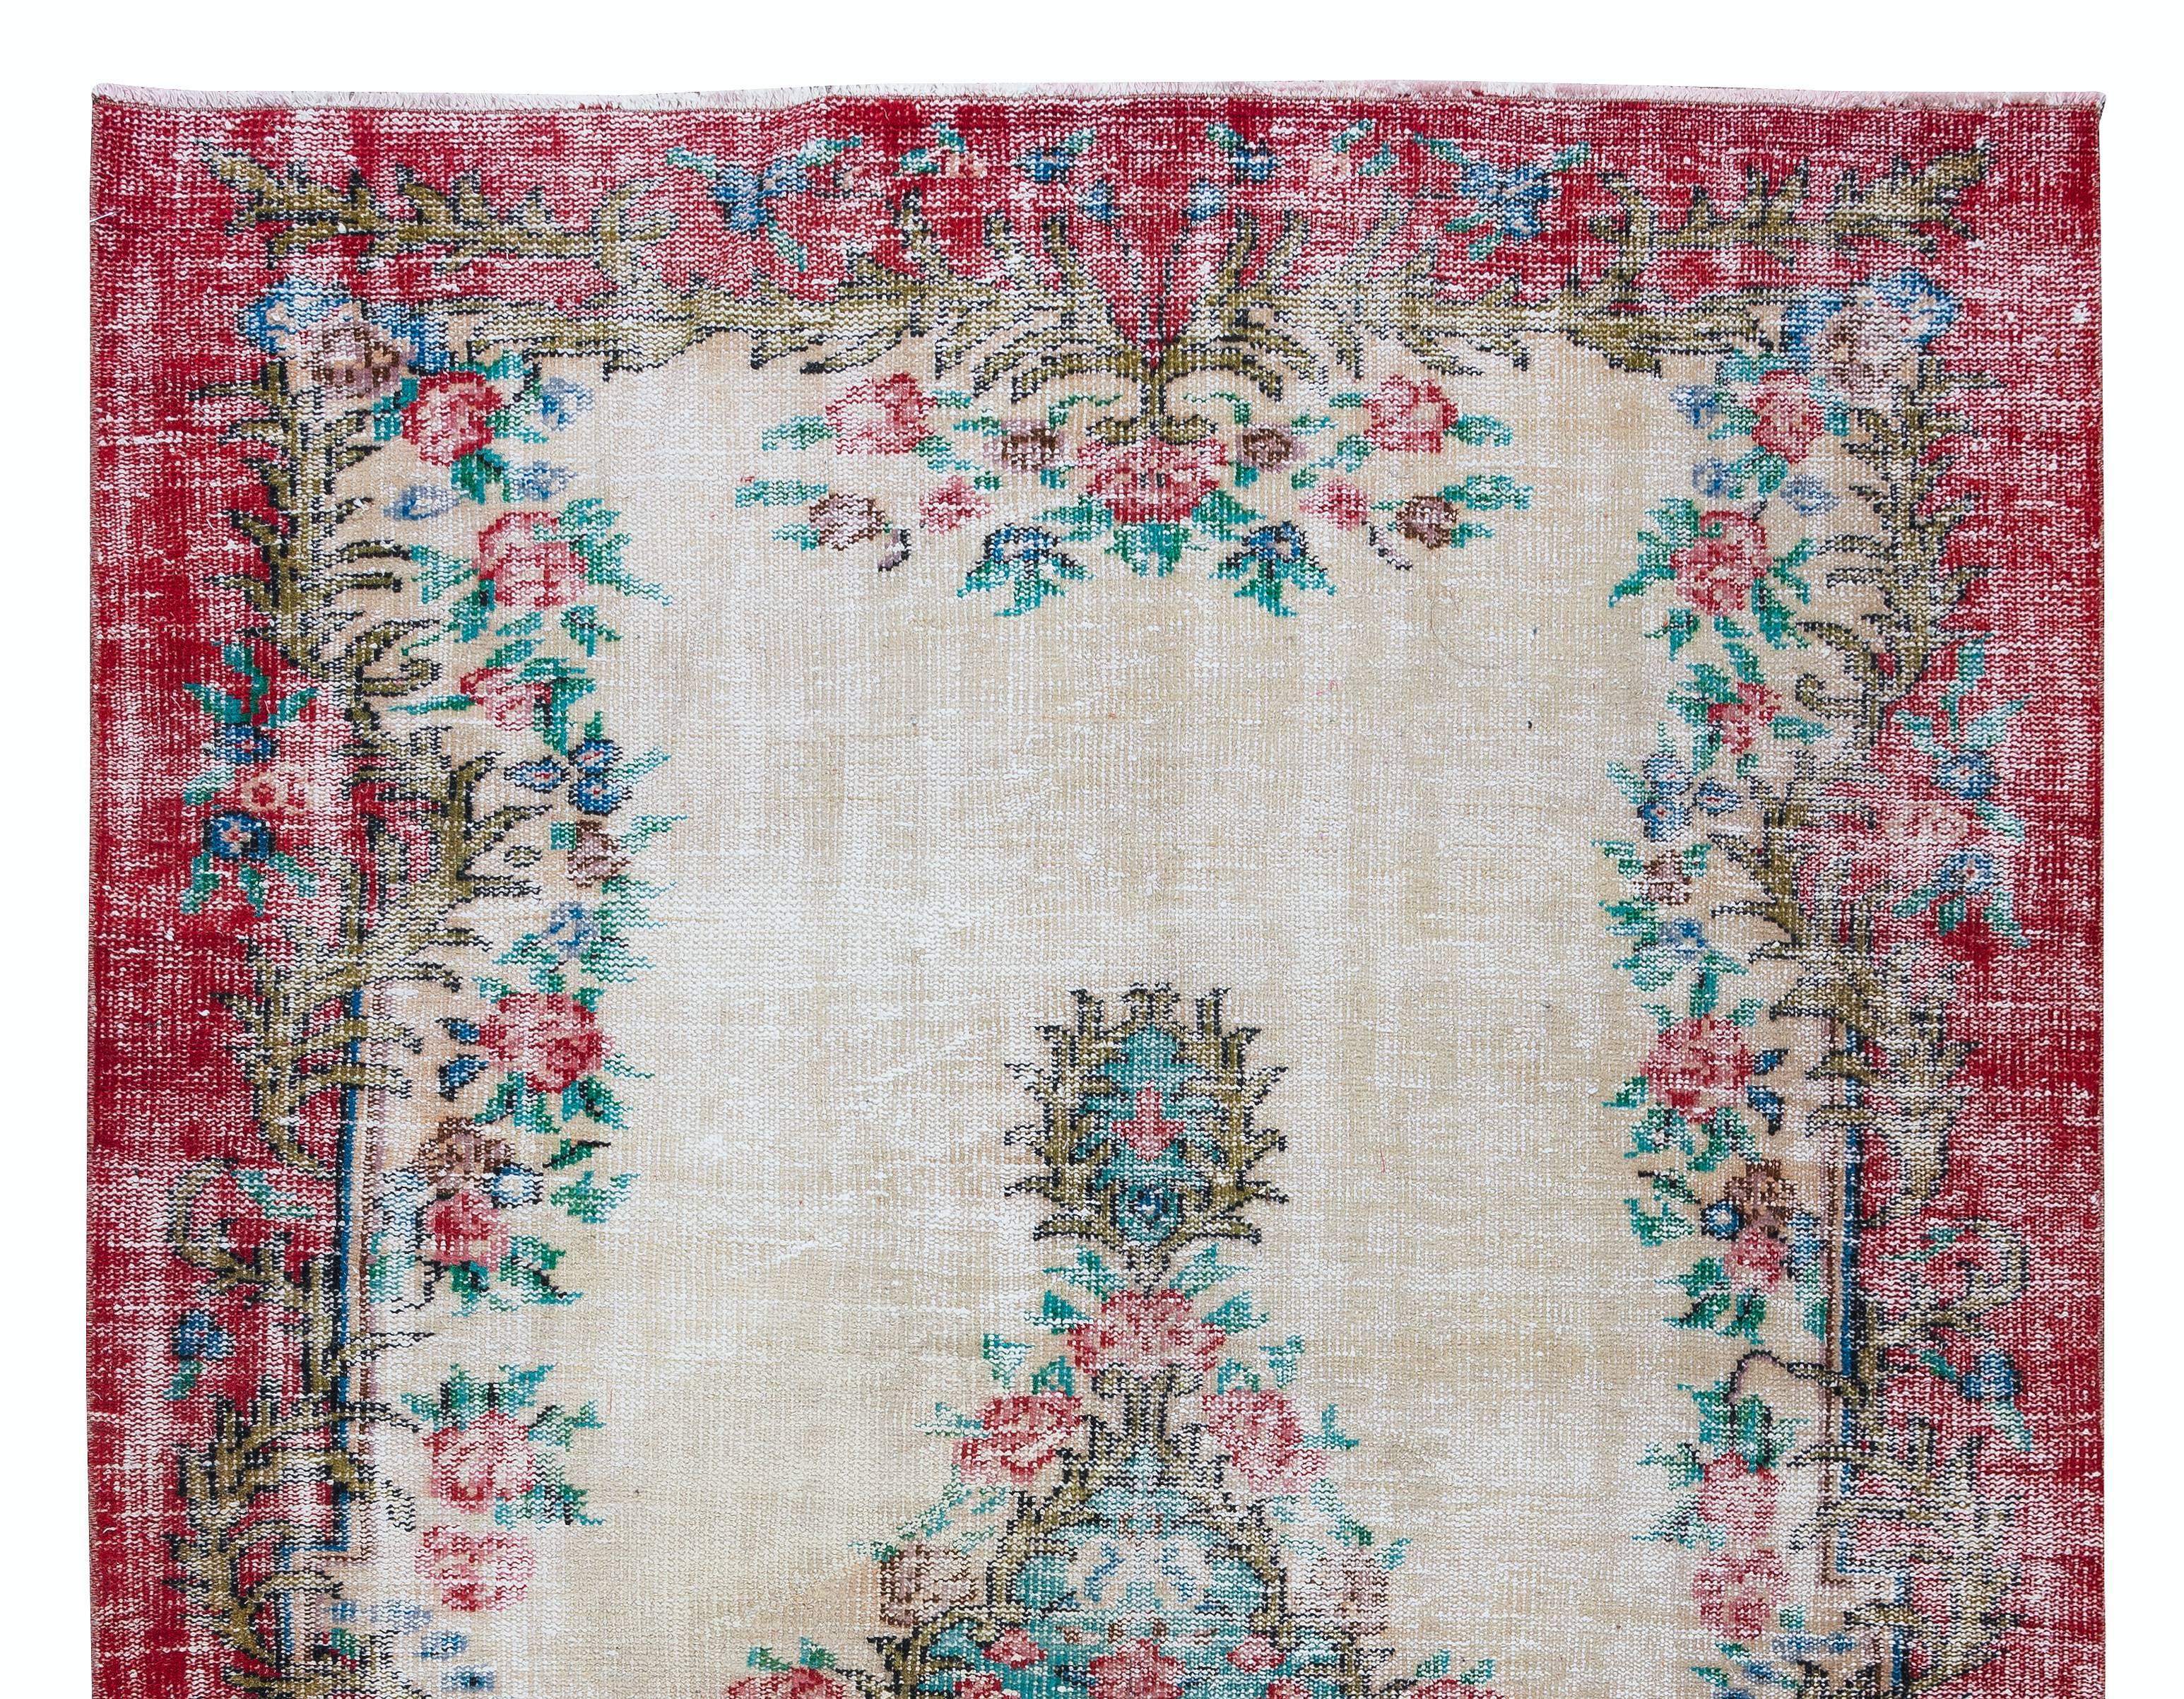 Hand-Woven Handknotted Turkish Area Rug with Roses, Flower Design Vintage Carpet For Sale